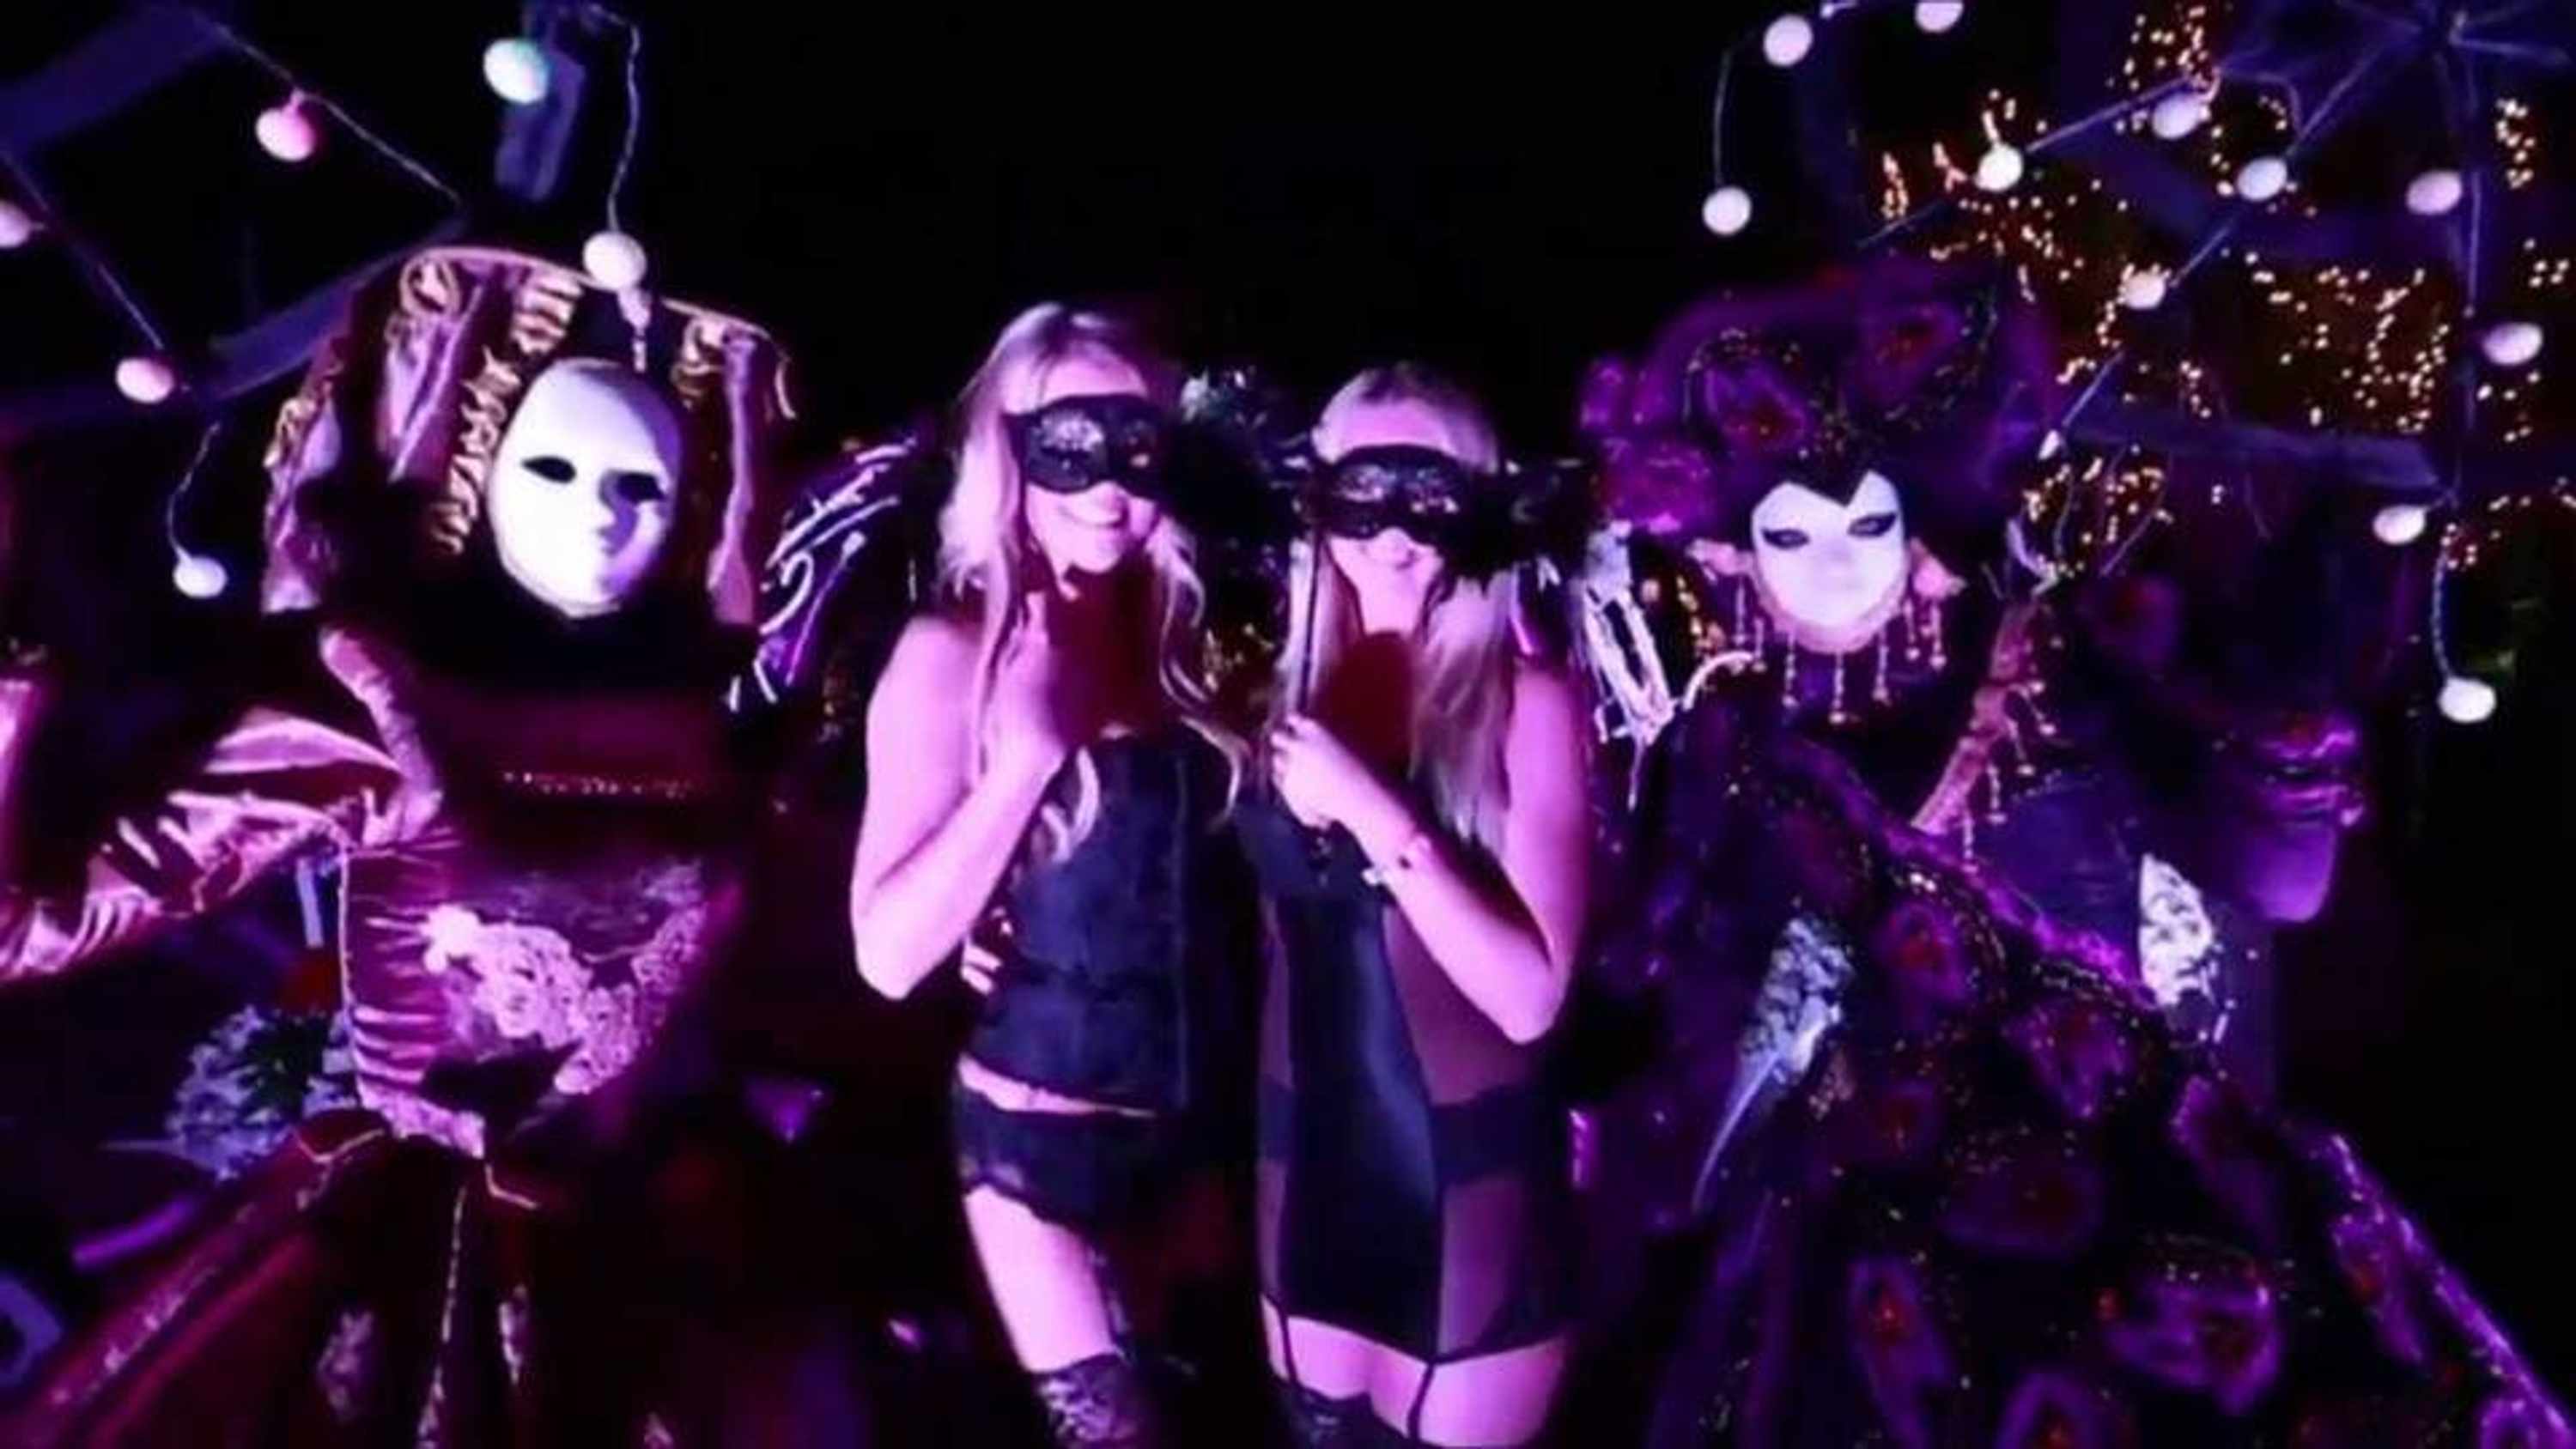 &quot;Paradisio: Eyes Wide Shut Under the Black Light&quot; NYC party